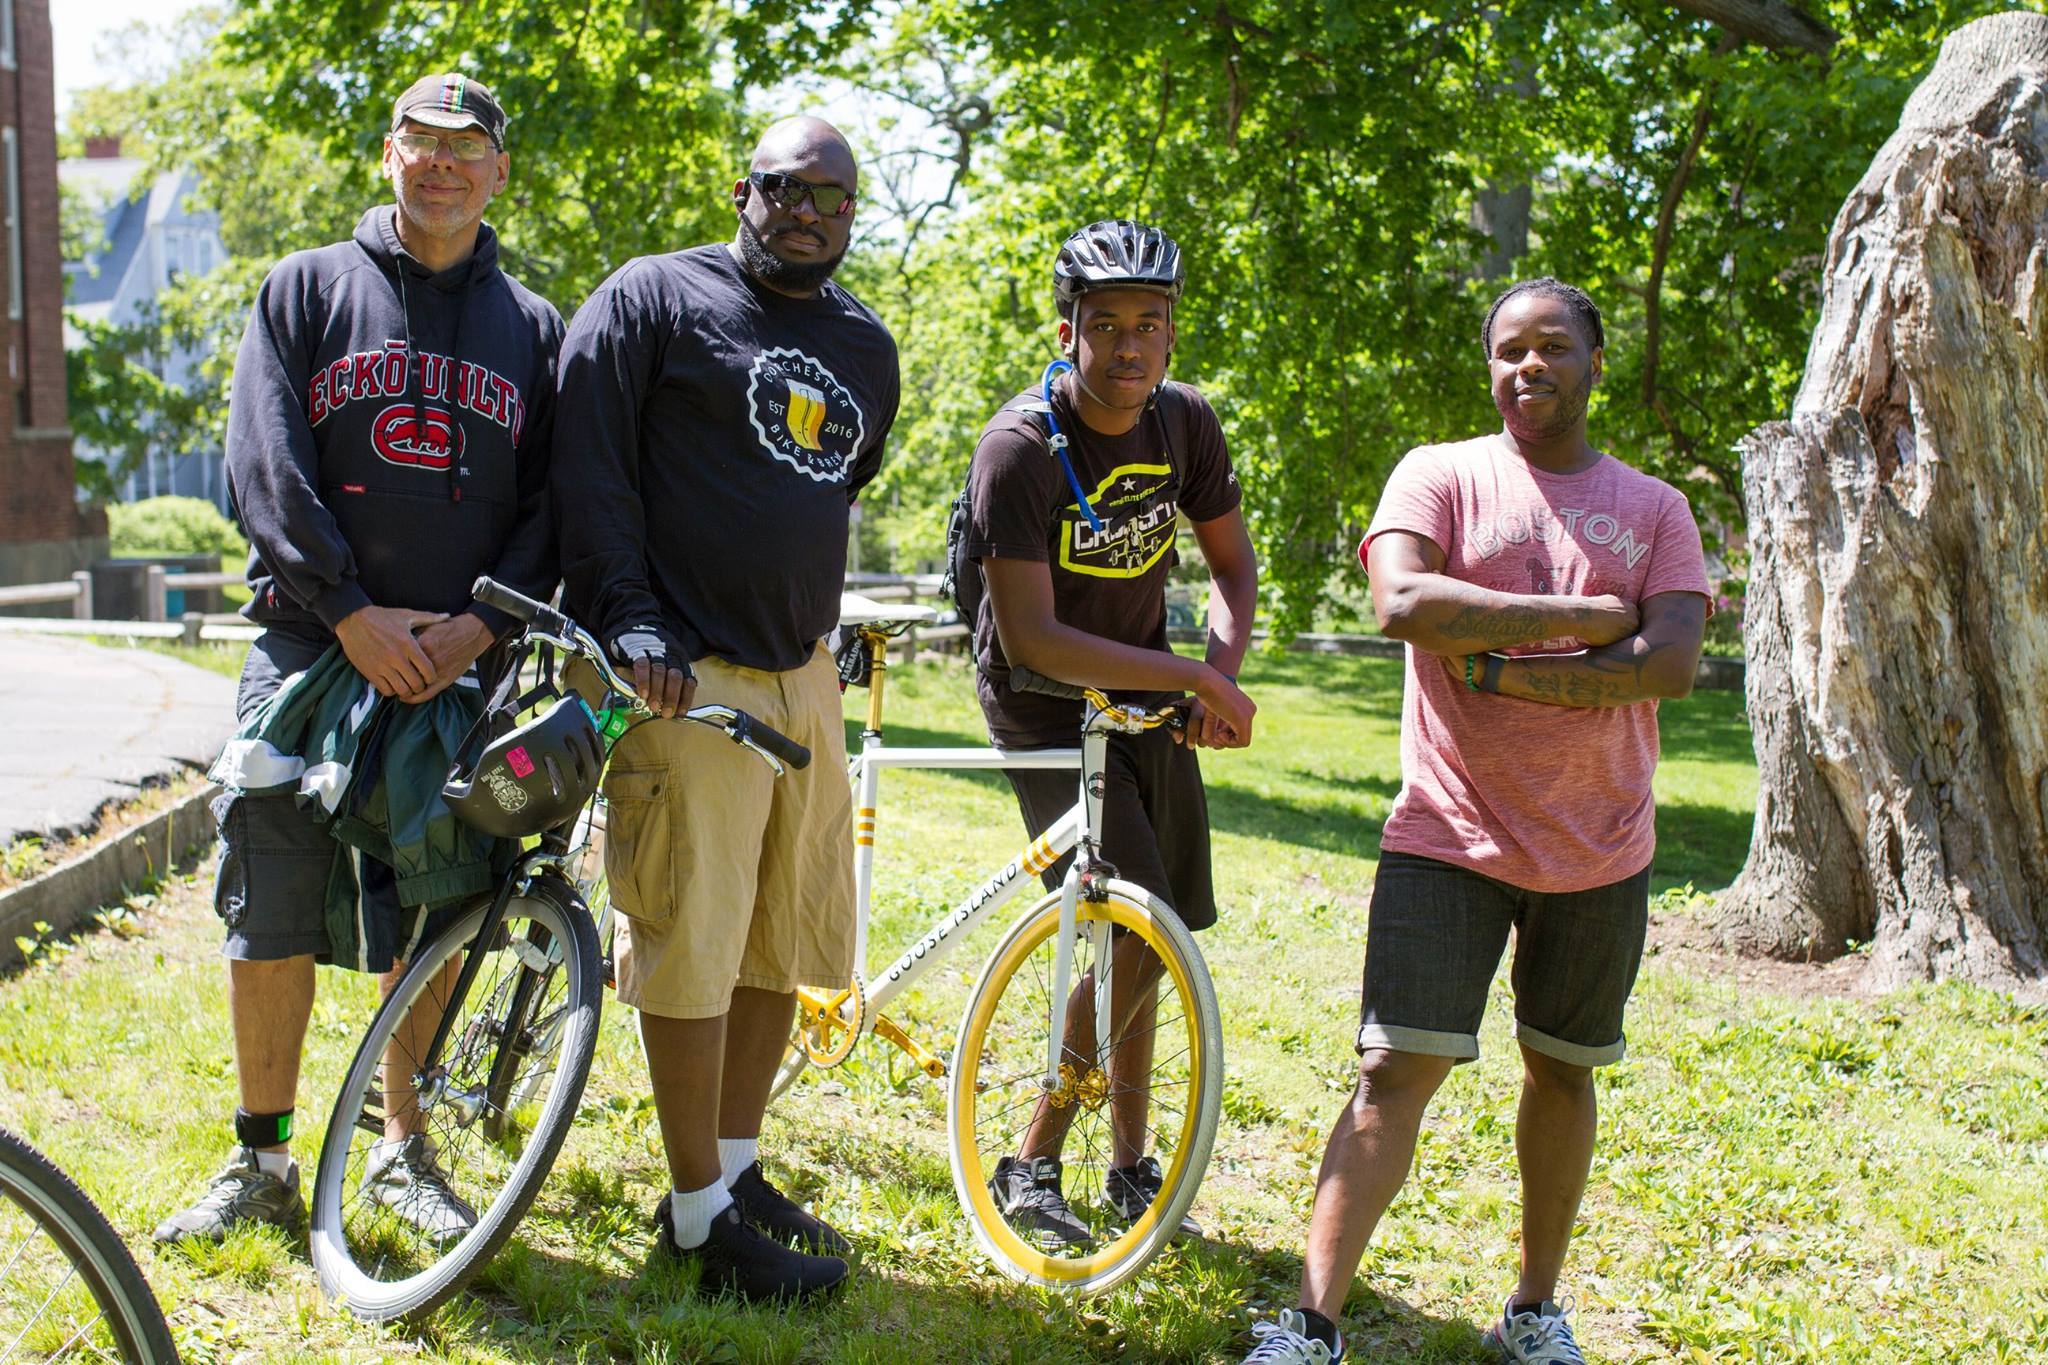 An image of 4 men of different ages standing around 2 bikes, in a park with greenery around them.